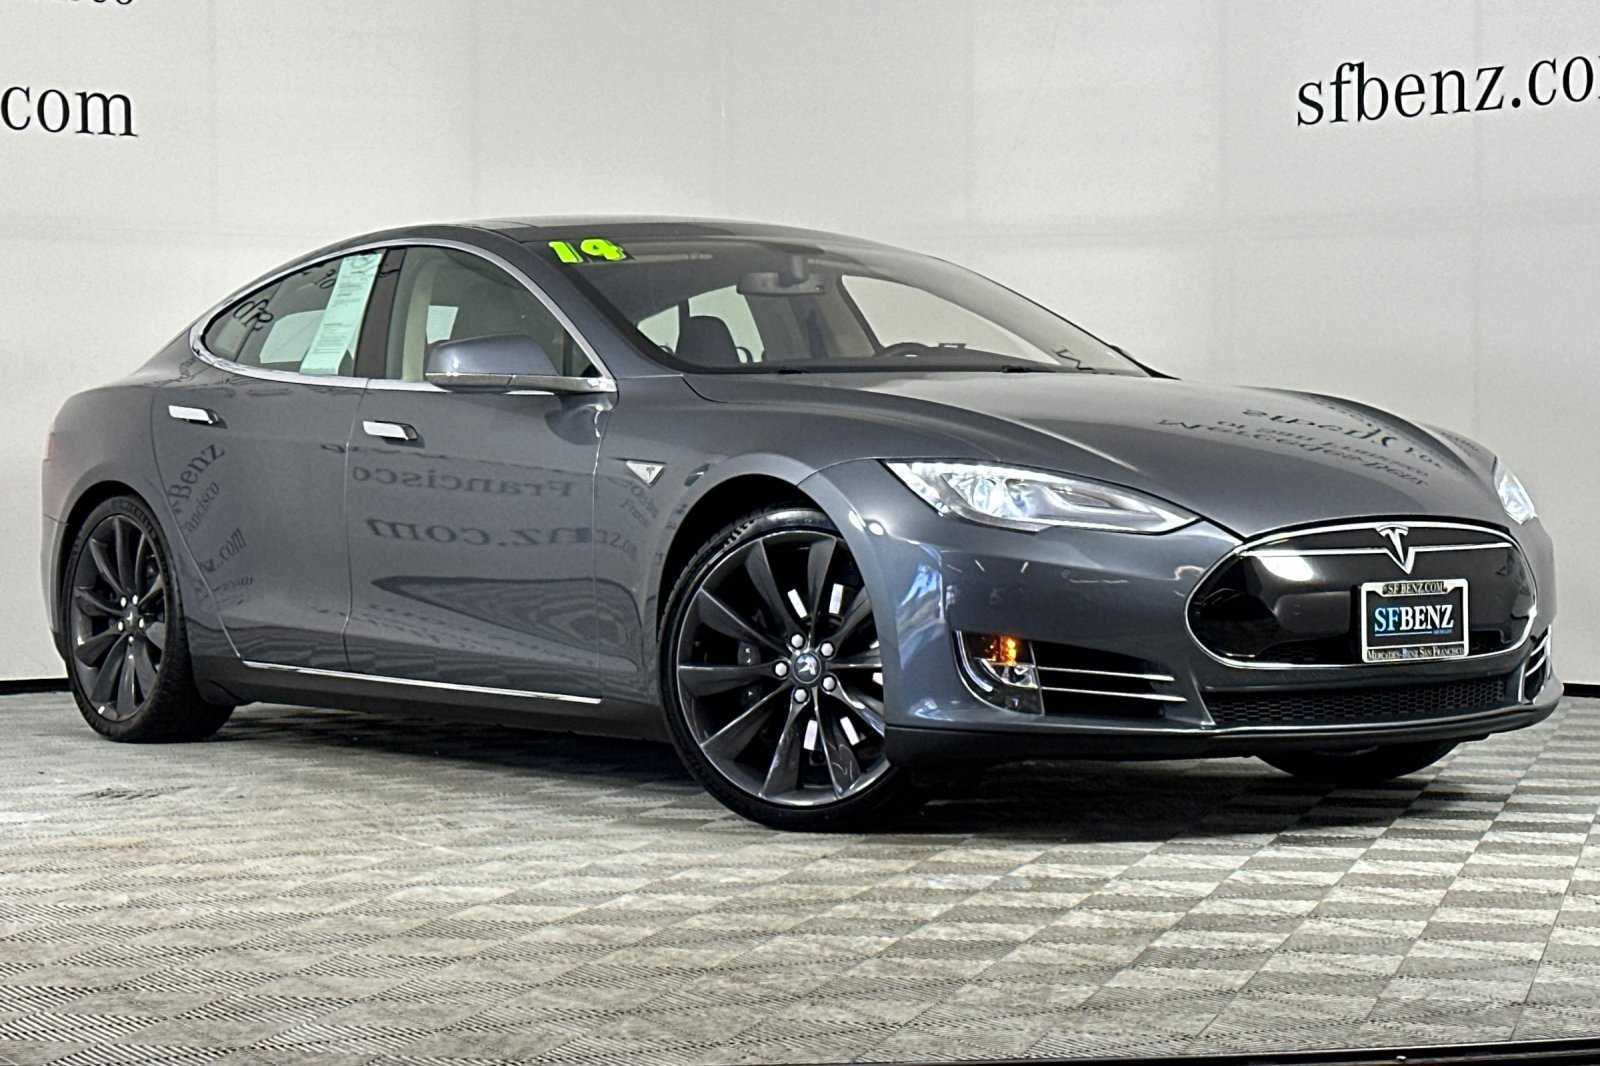 Used 2014 Tesla Model S S with VIN 5YJSA1H11EFP45809 for sale in South San Francisco, CA